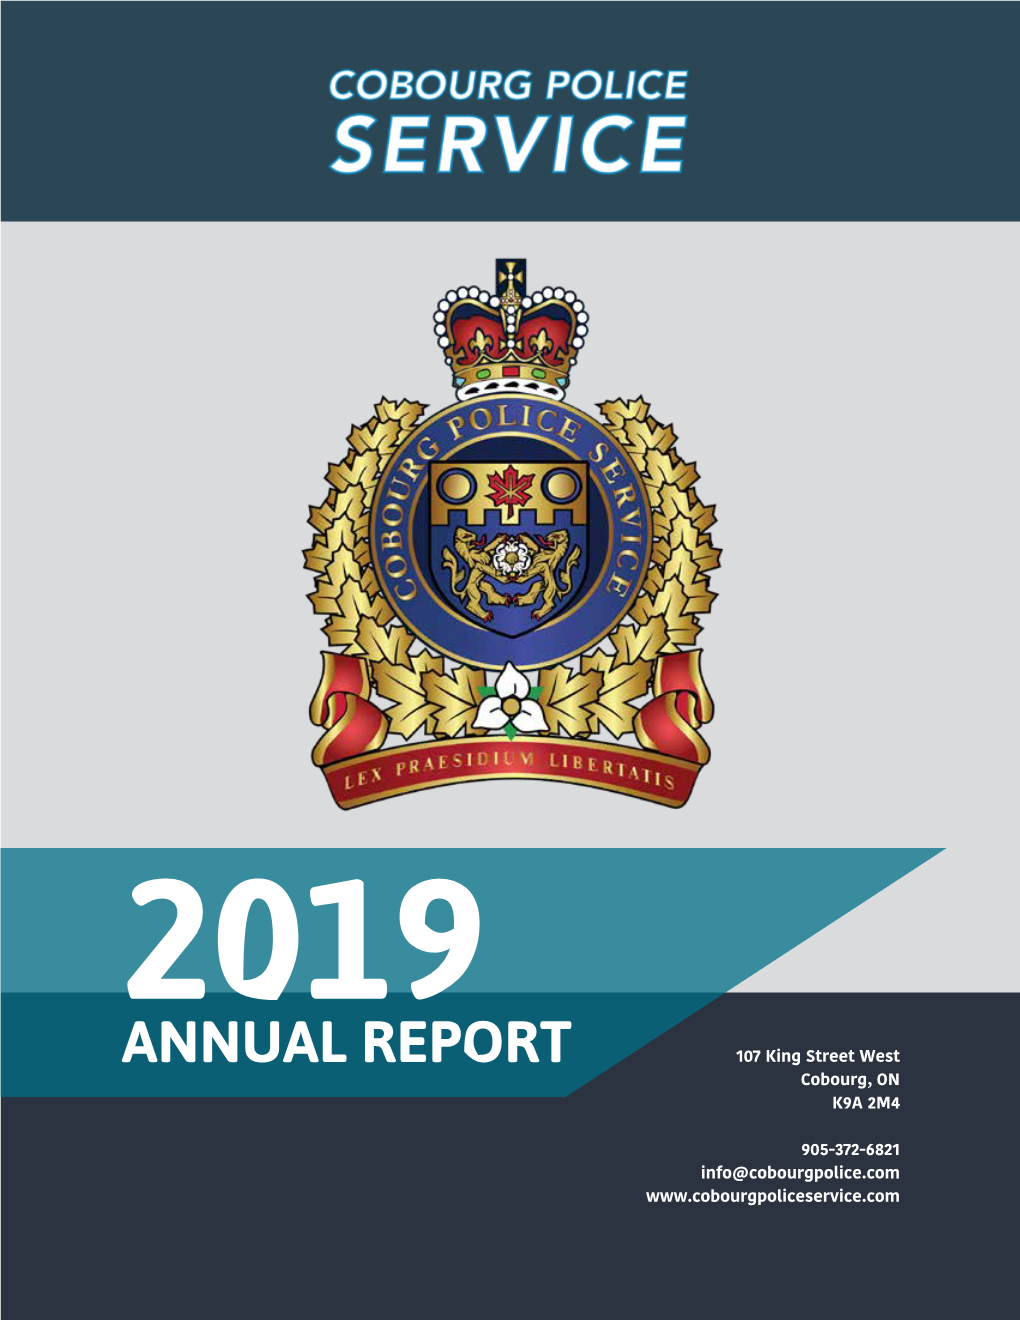 ANNUAL REPORT 107 King Street West Cobourg, on K9A 2M4